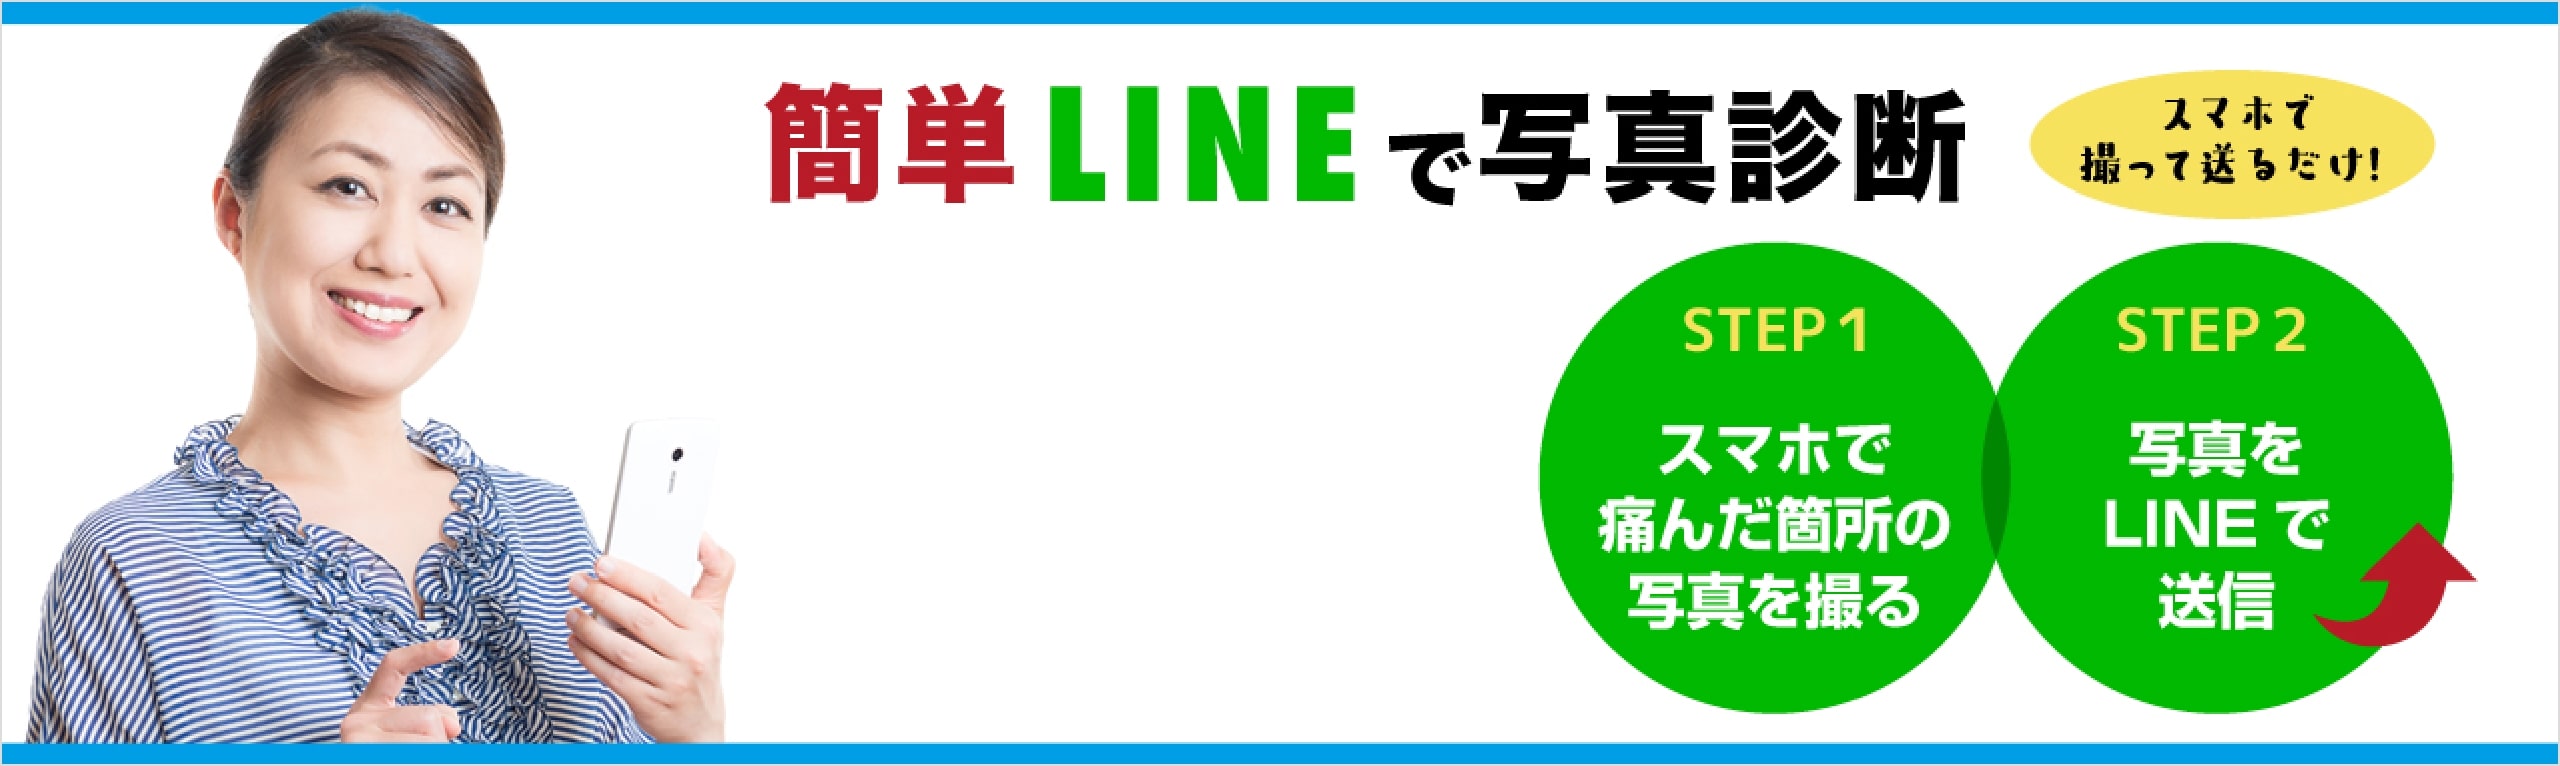 LINEで写真診断